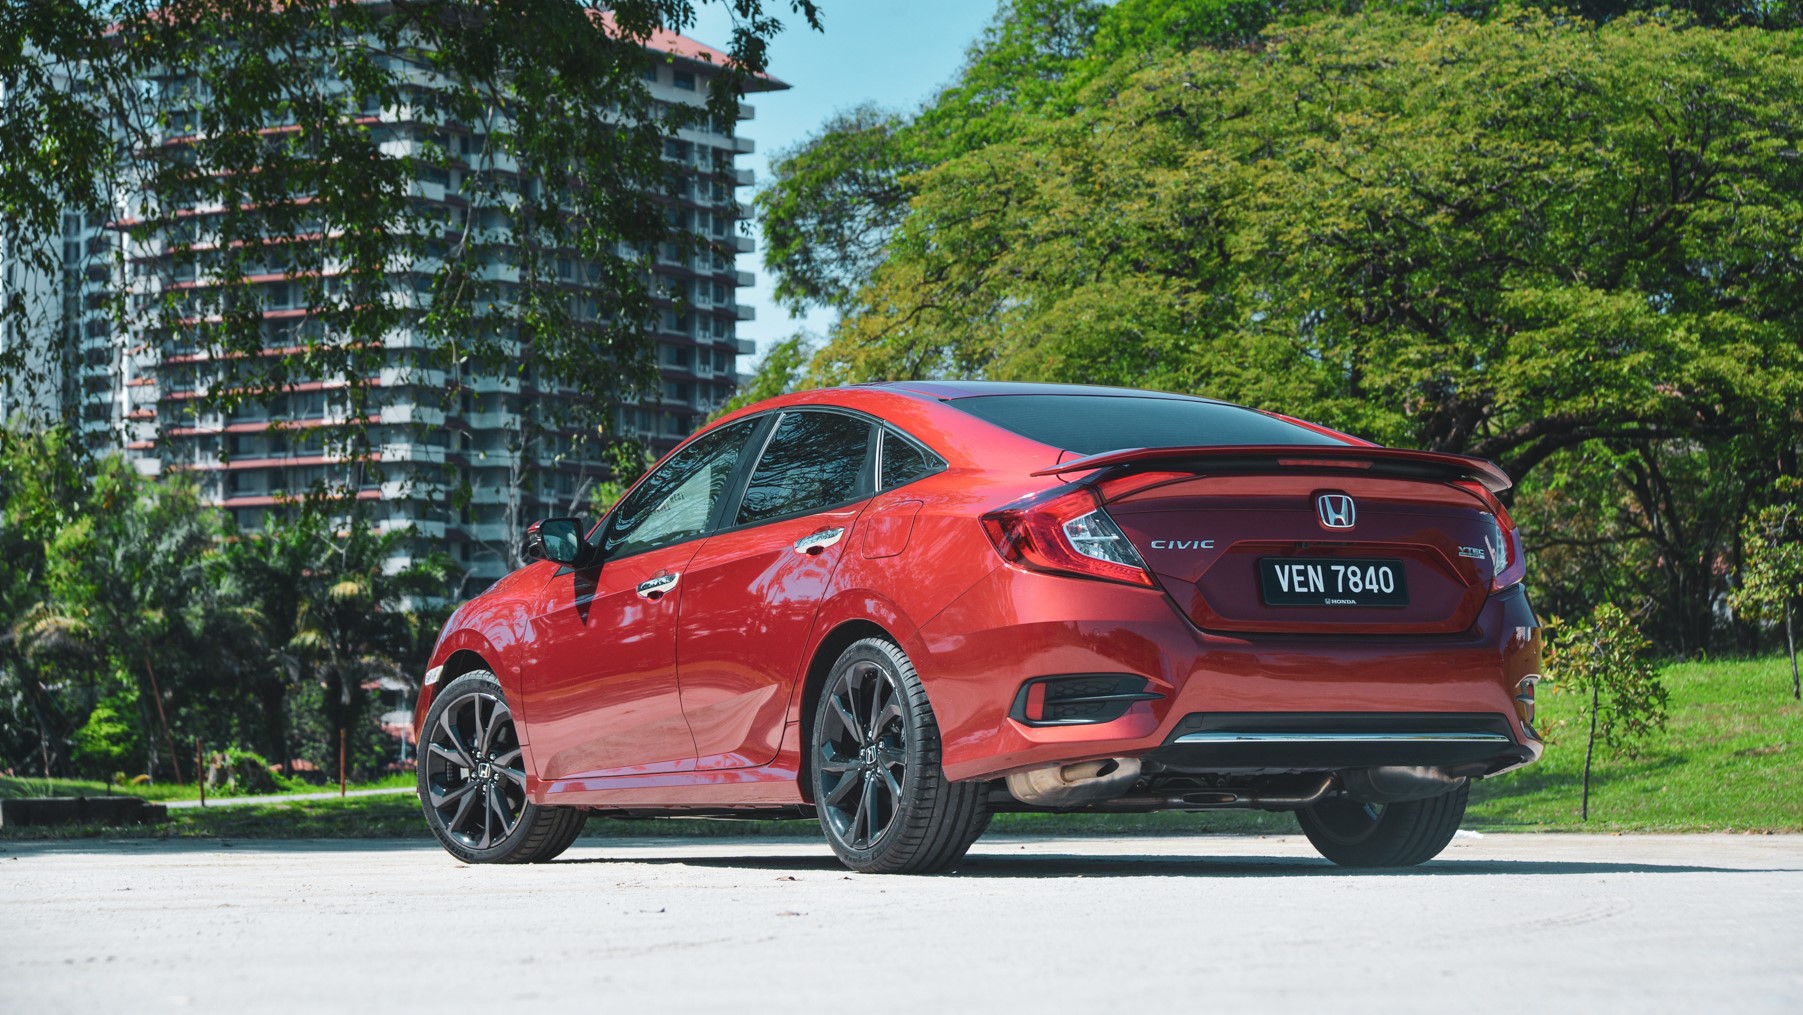 2020 Honda Civic Turbo review: an improved crowd pleaser